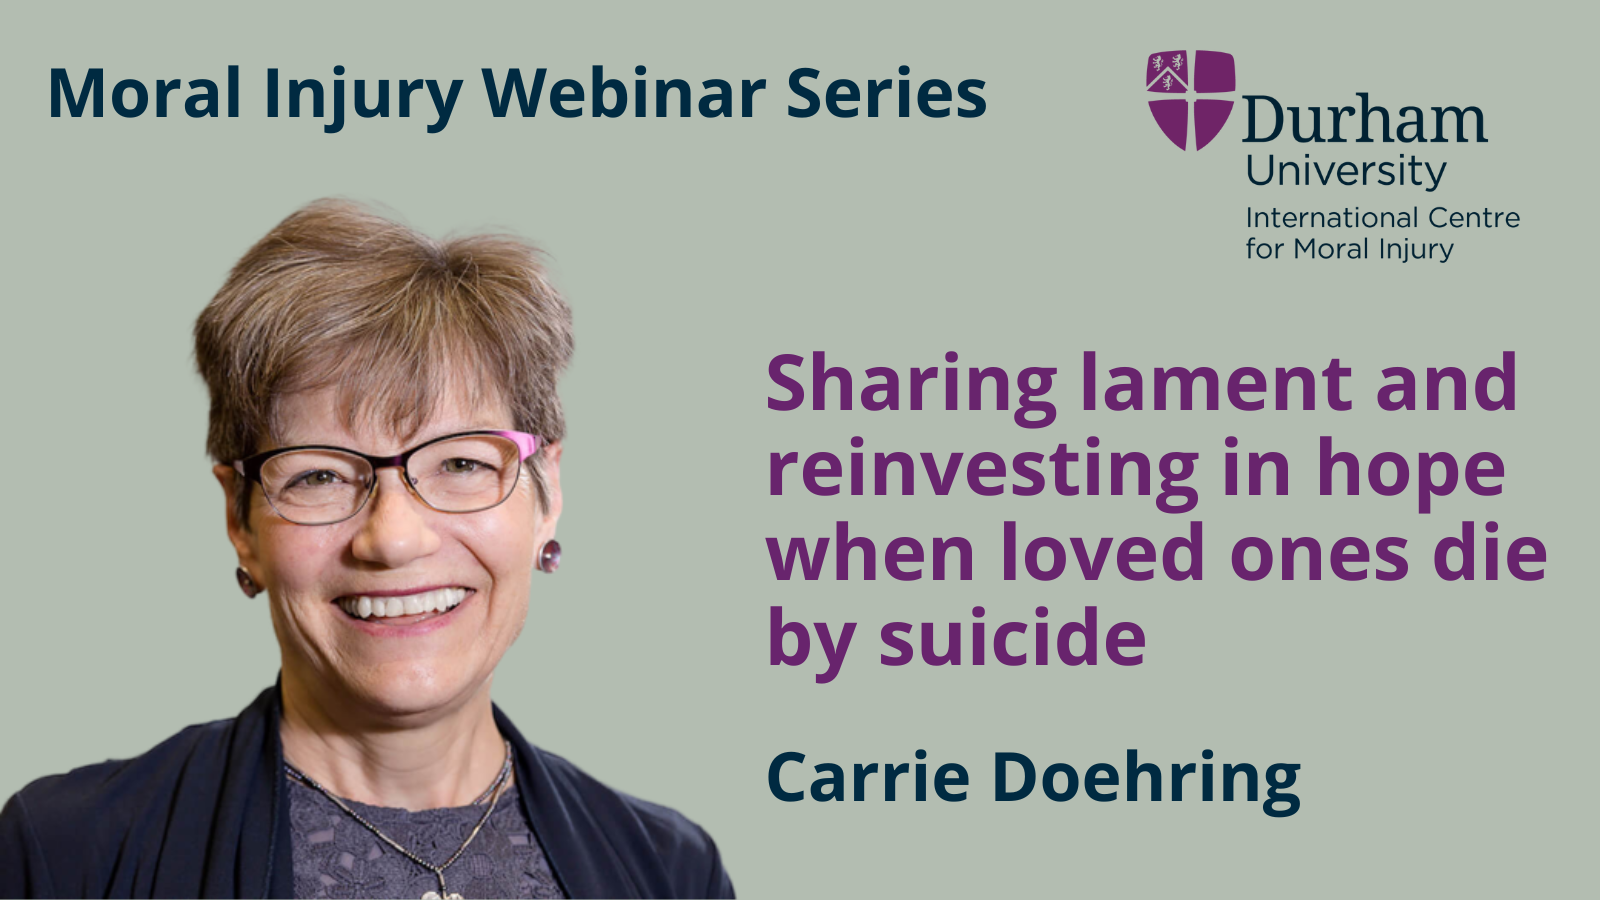 Sharing lament and reinvesting in hope when loved ones die by suicide, by Carrie Doehring